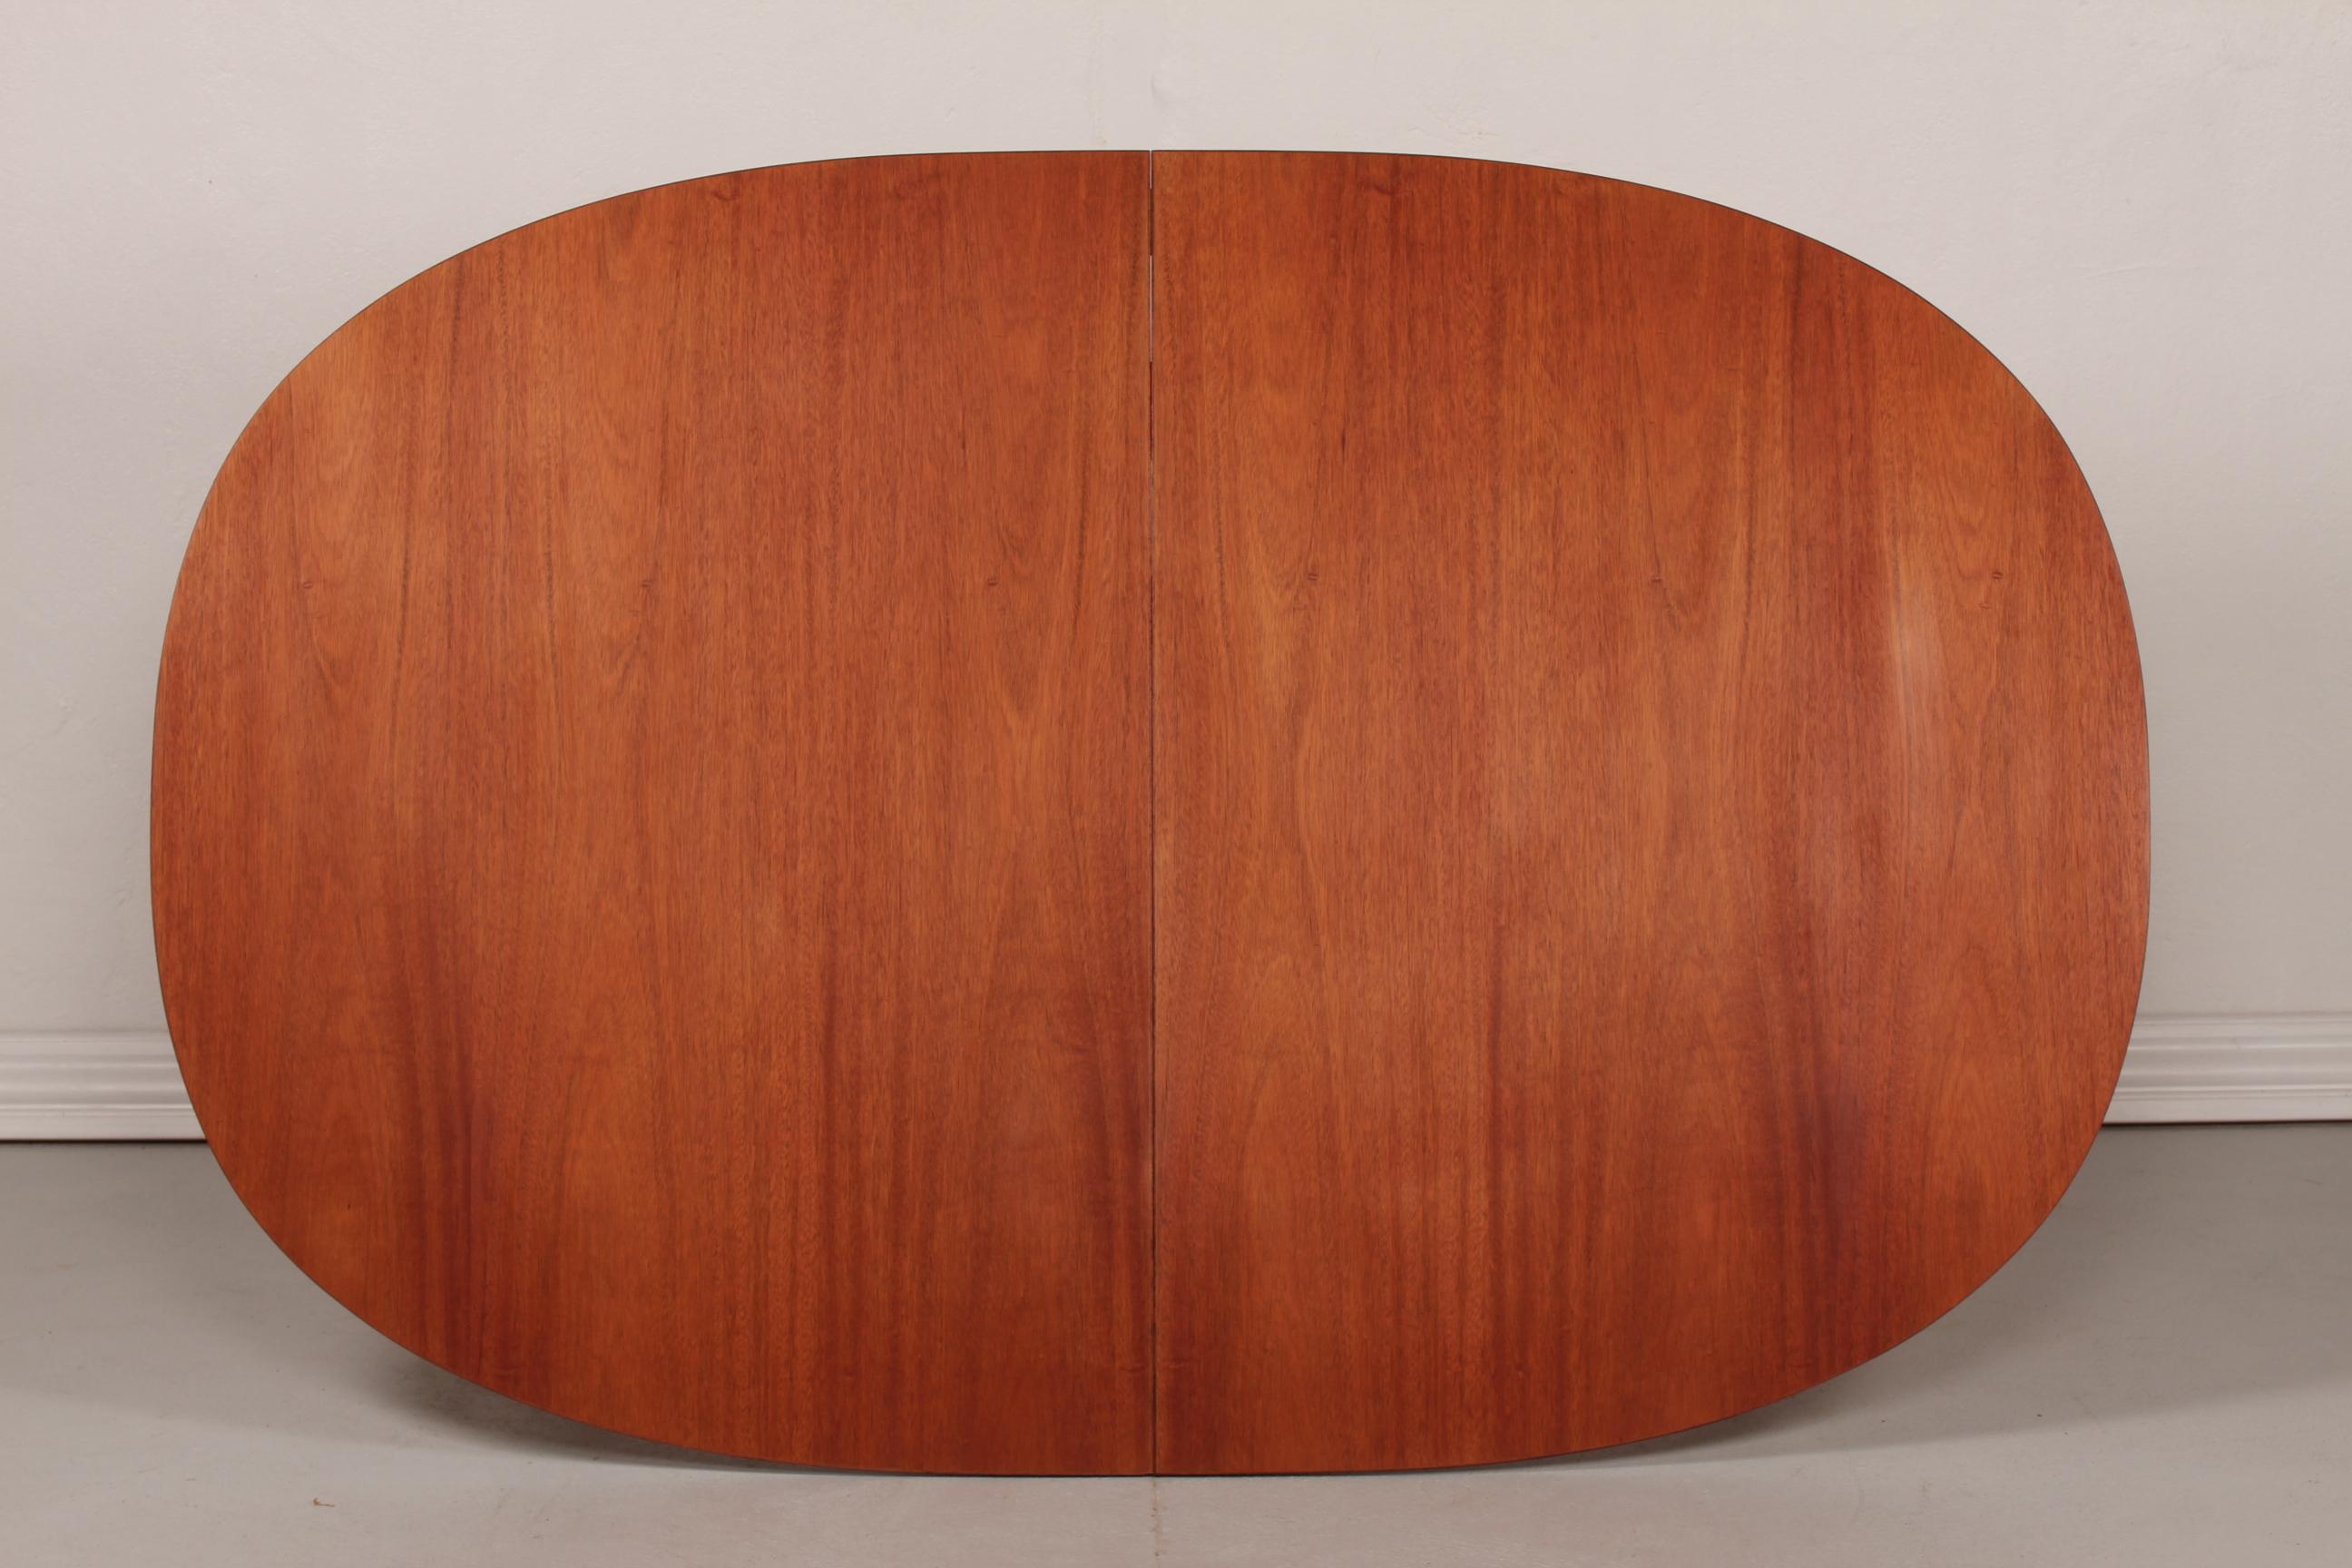 Late 20th Century Piet Hein & Bruno Mathsson Super Ellipse Table Extension of Oiled Mahogany, 1993